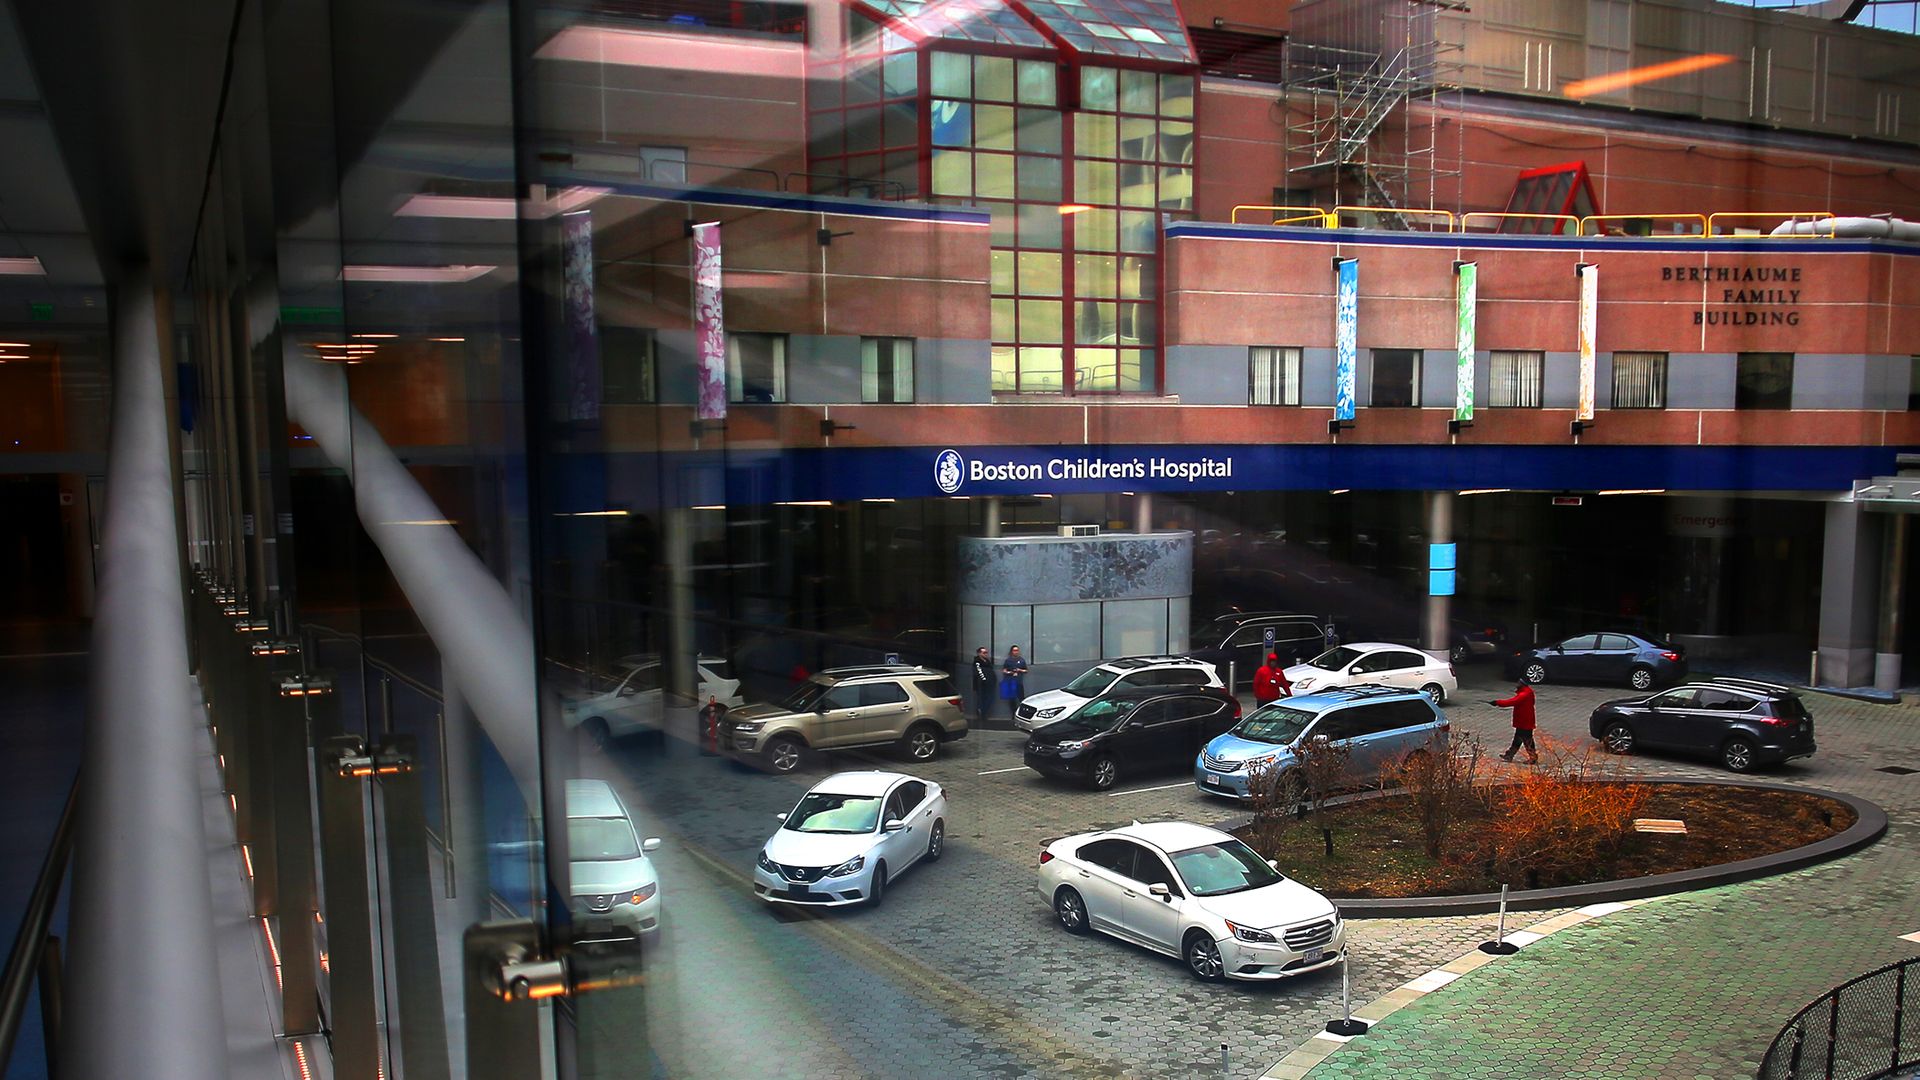 The view of the Boston Children's Hospital entrance from inside the building shows several cards in the parking lot.